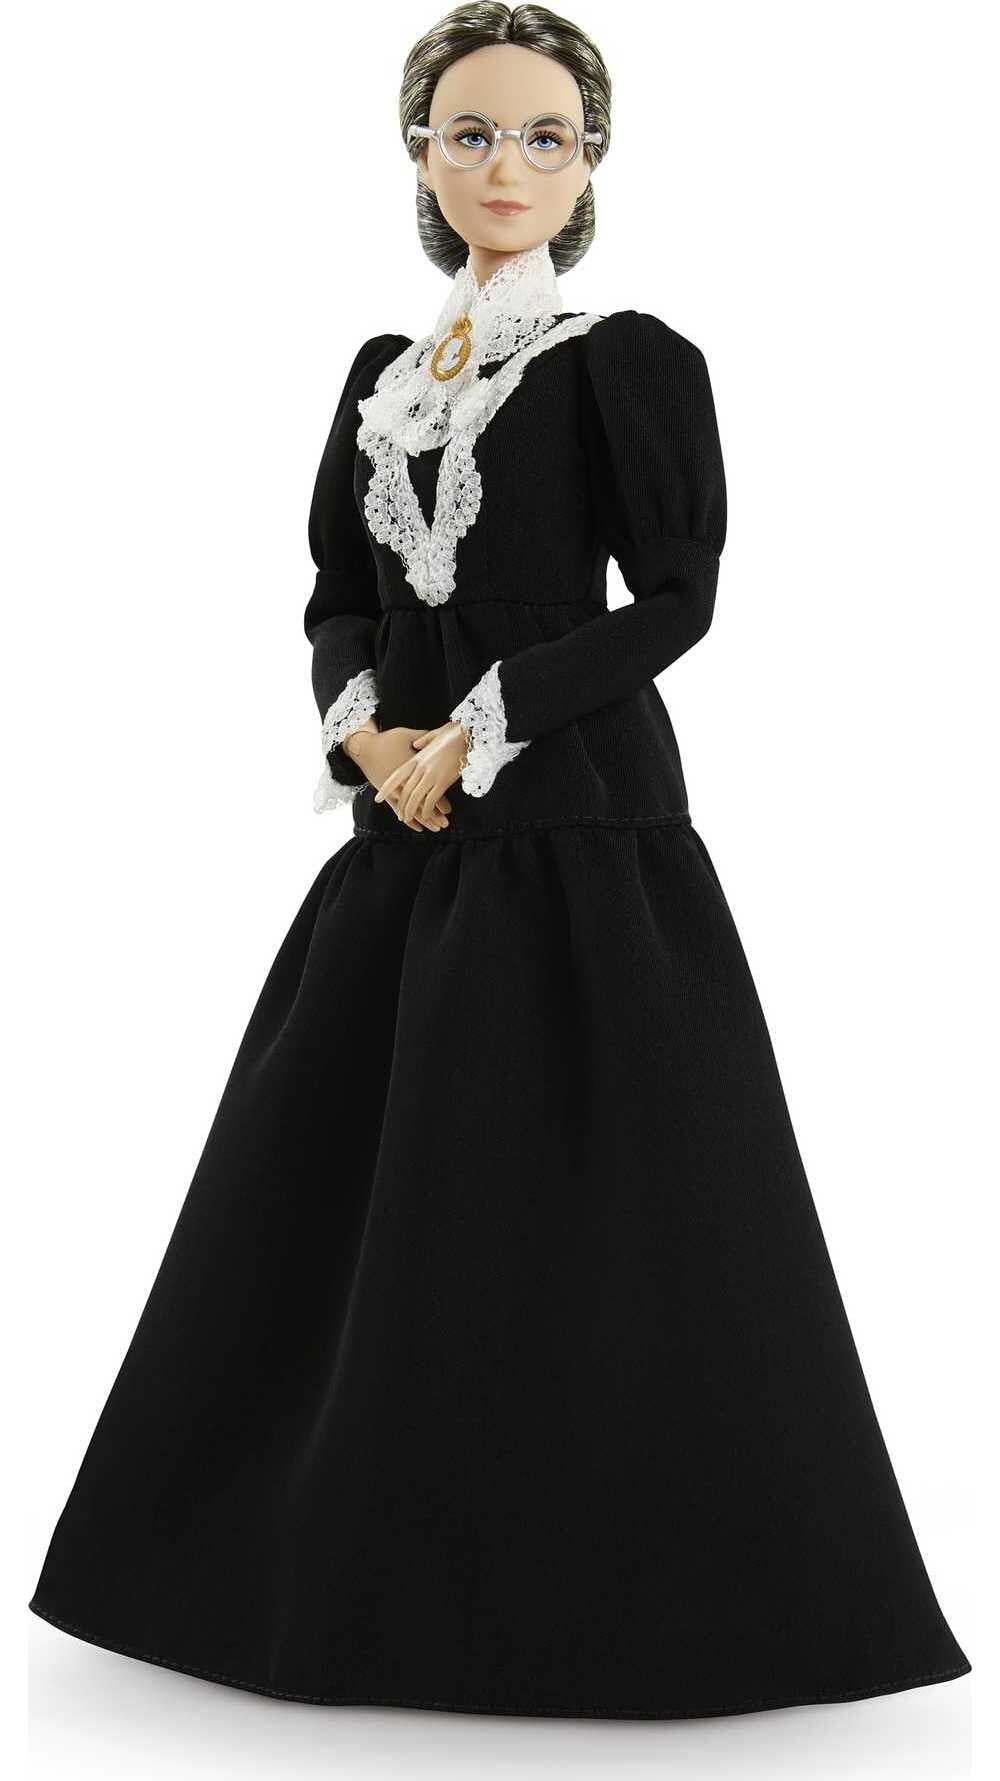 Barbie Inspiring Women Susan B. Anthony Collectible Doll Black with Doll Stand - Walmart.com